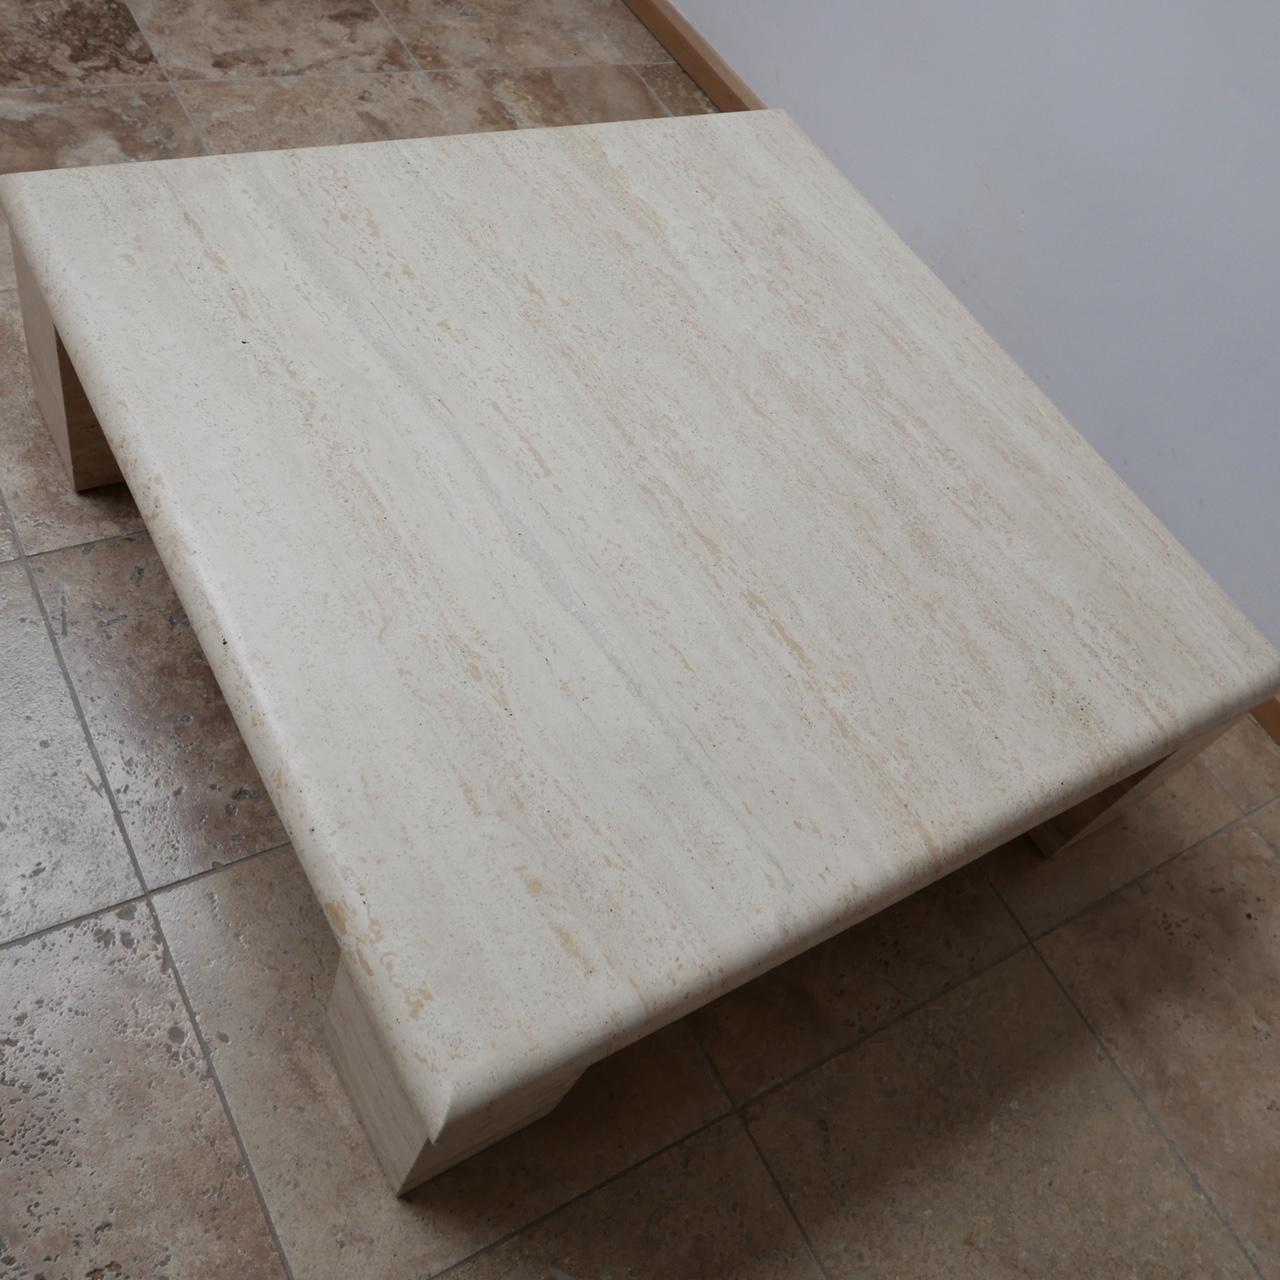 A large travertine coffee table in a similar manner to Up&Up.

A large central slab over four movable square legs.

Italian, circa 1960s.

The top is in perfect condition, the legs have some small nicks which are generally not